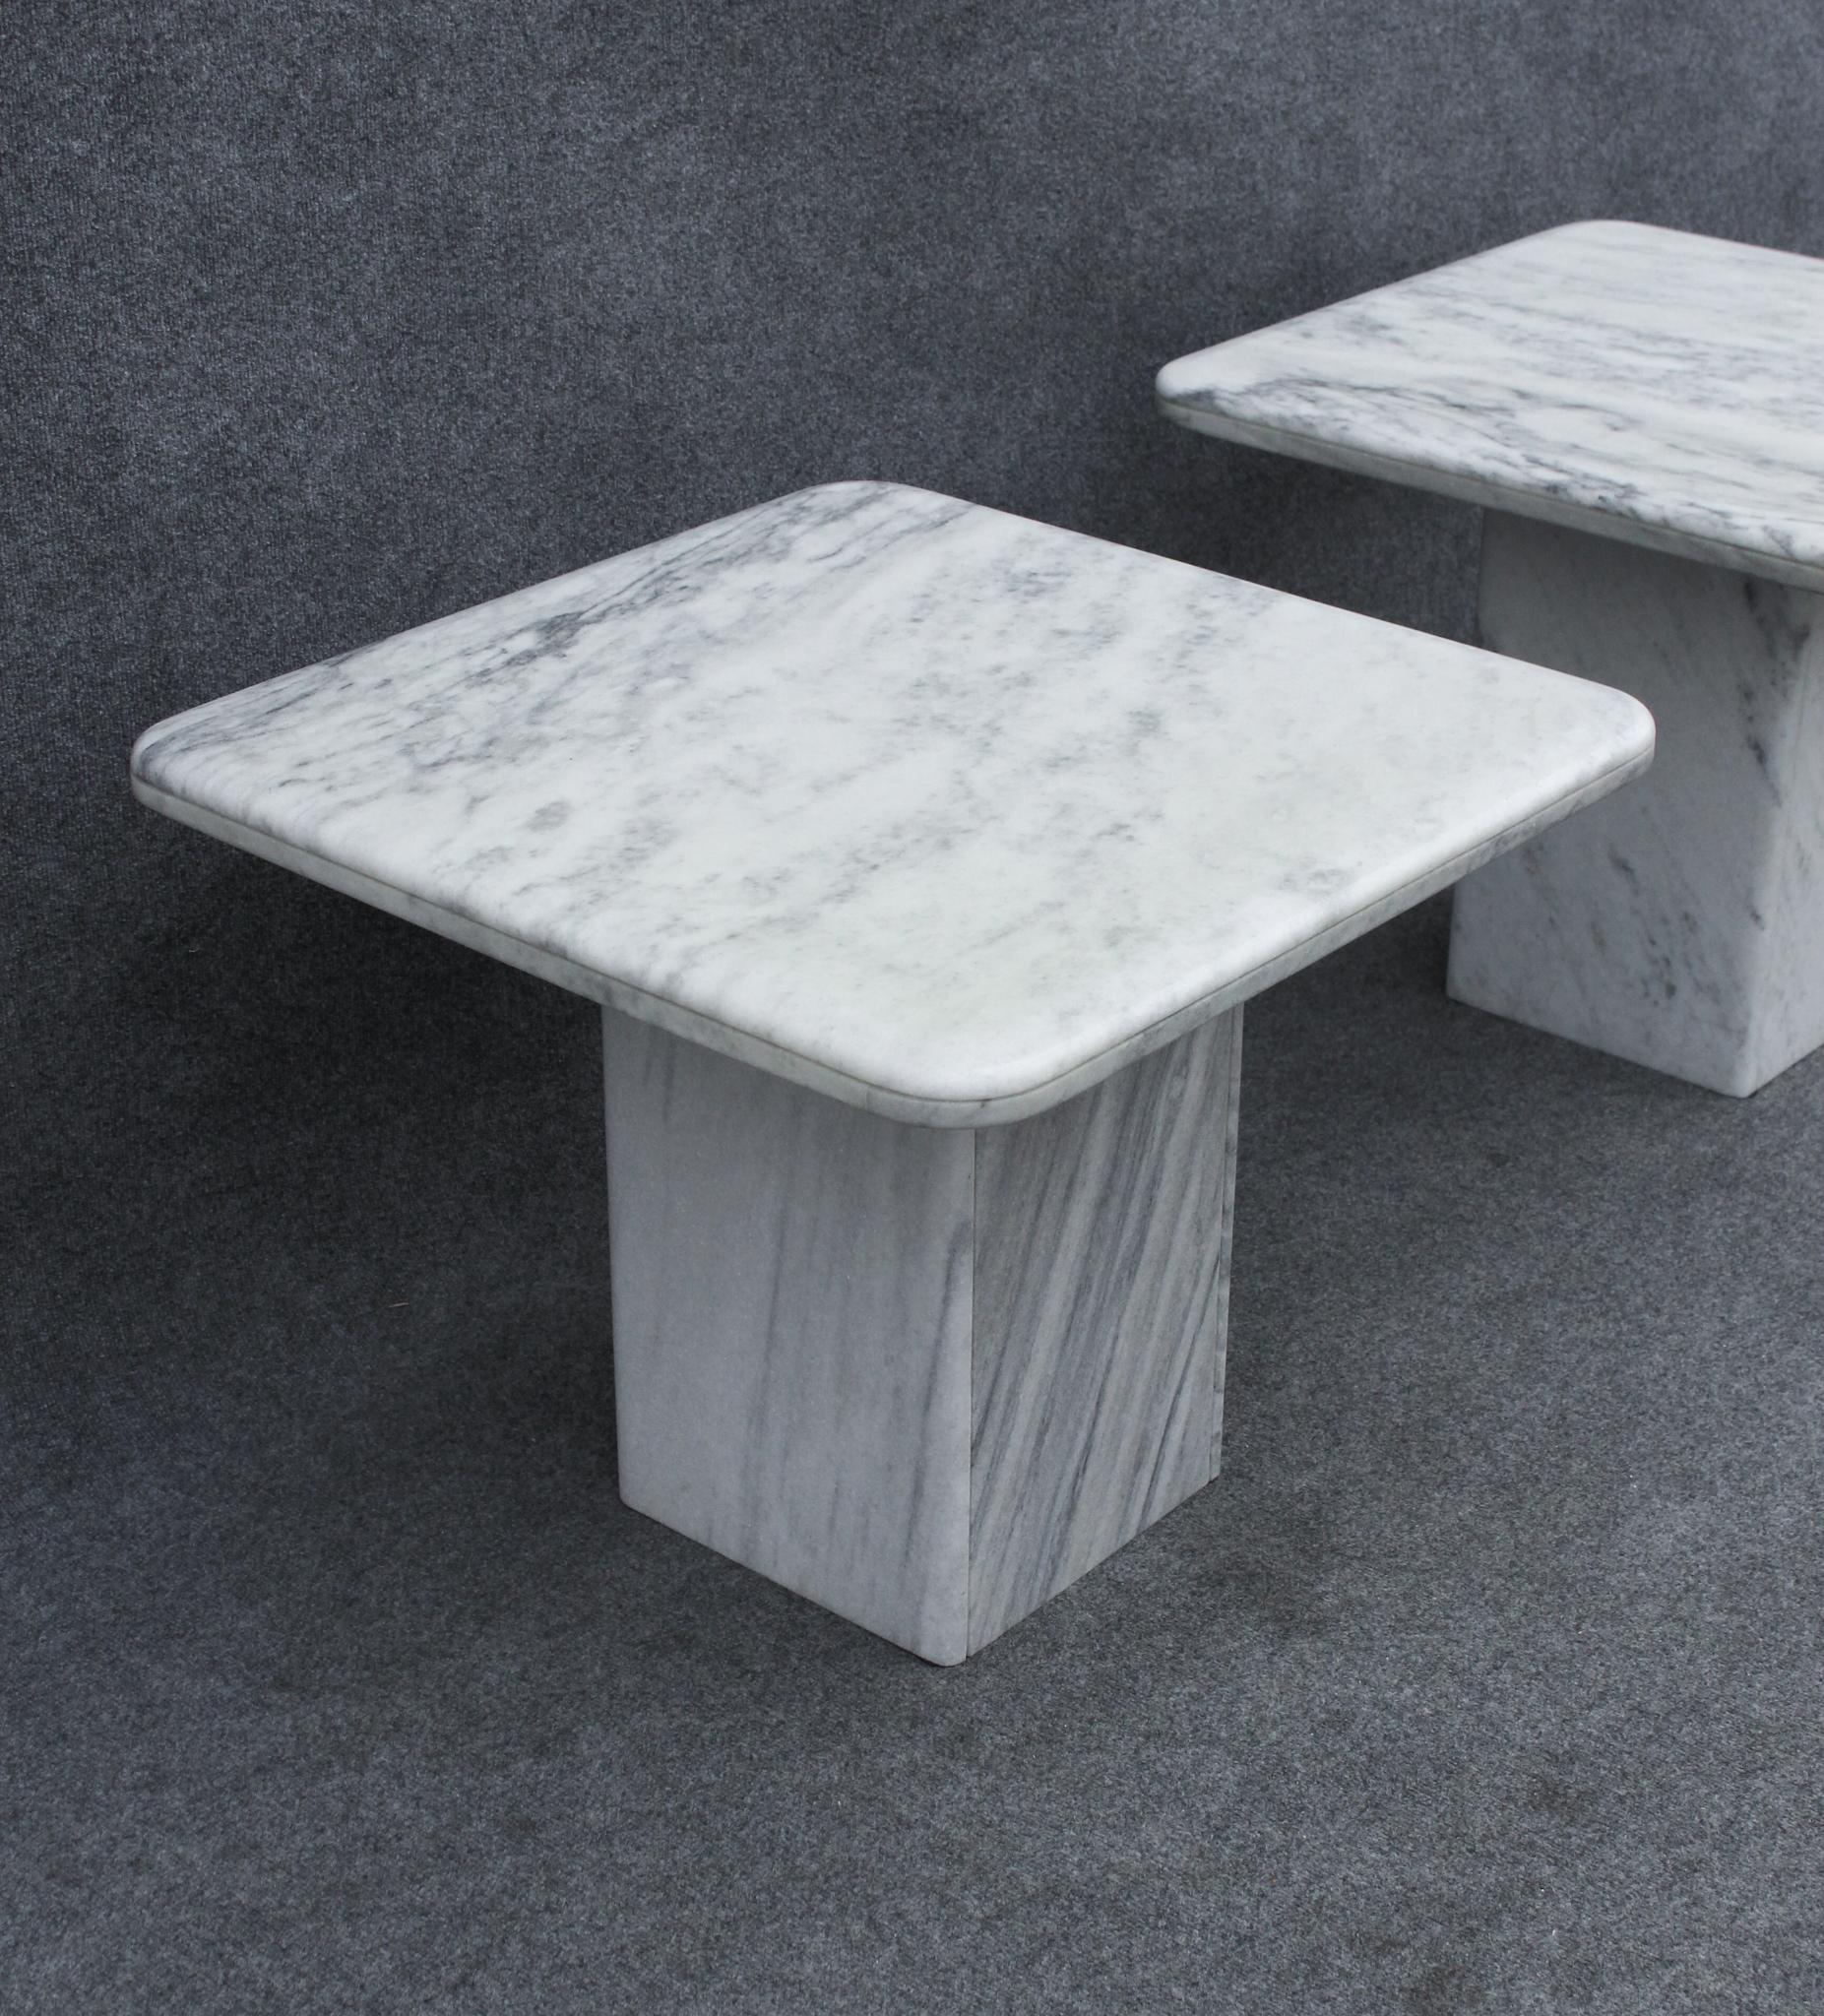 Late 20th Century Pair of Italian Side Tables in White Marble With Grey Veining 1970s For Sale